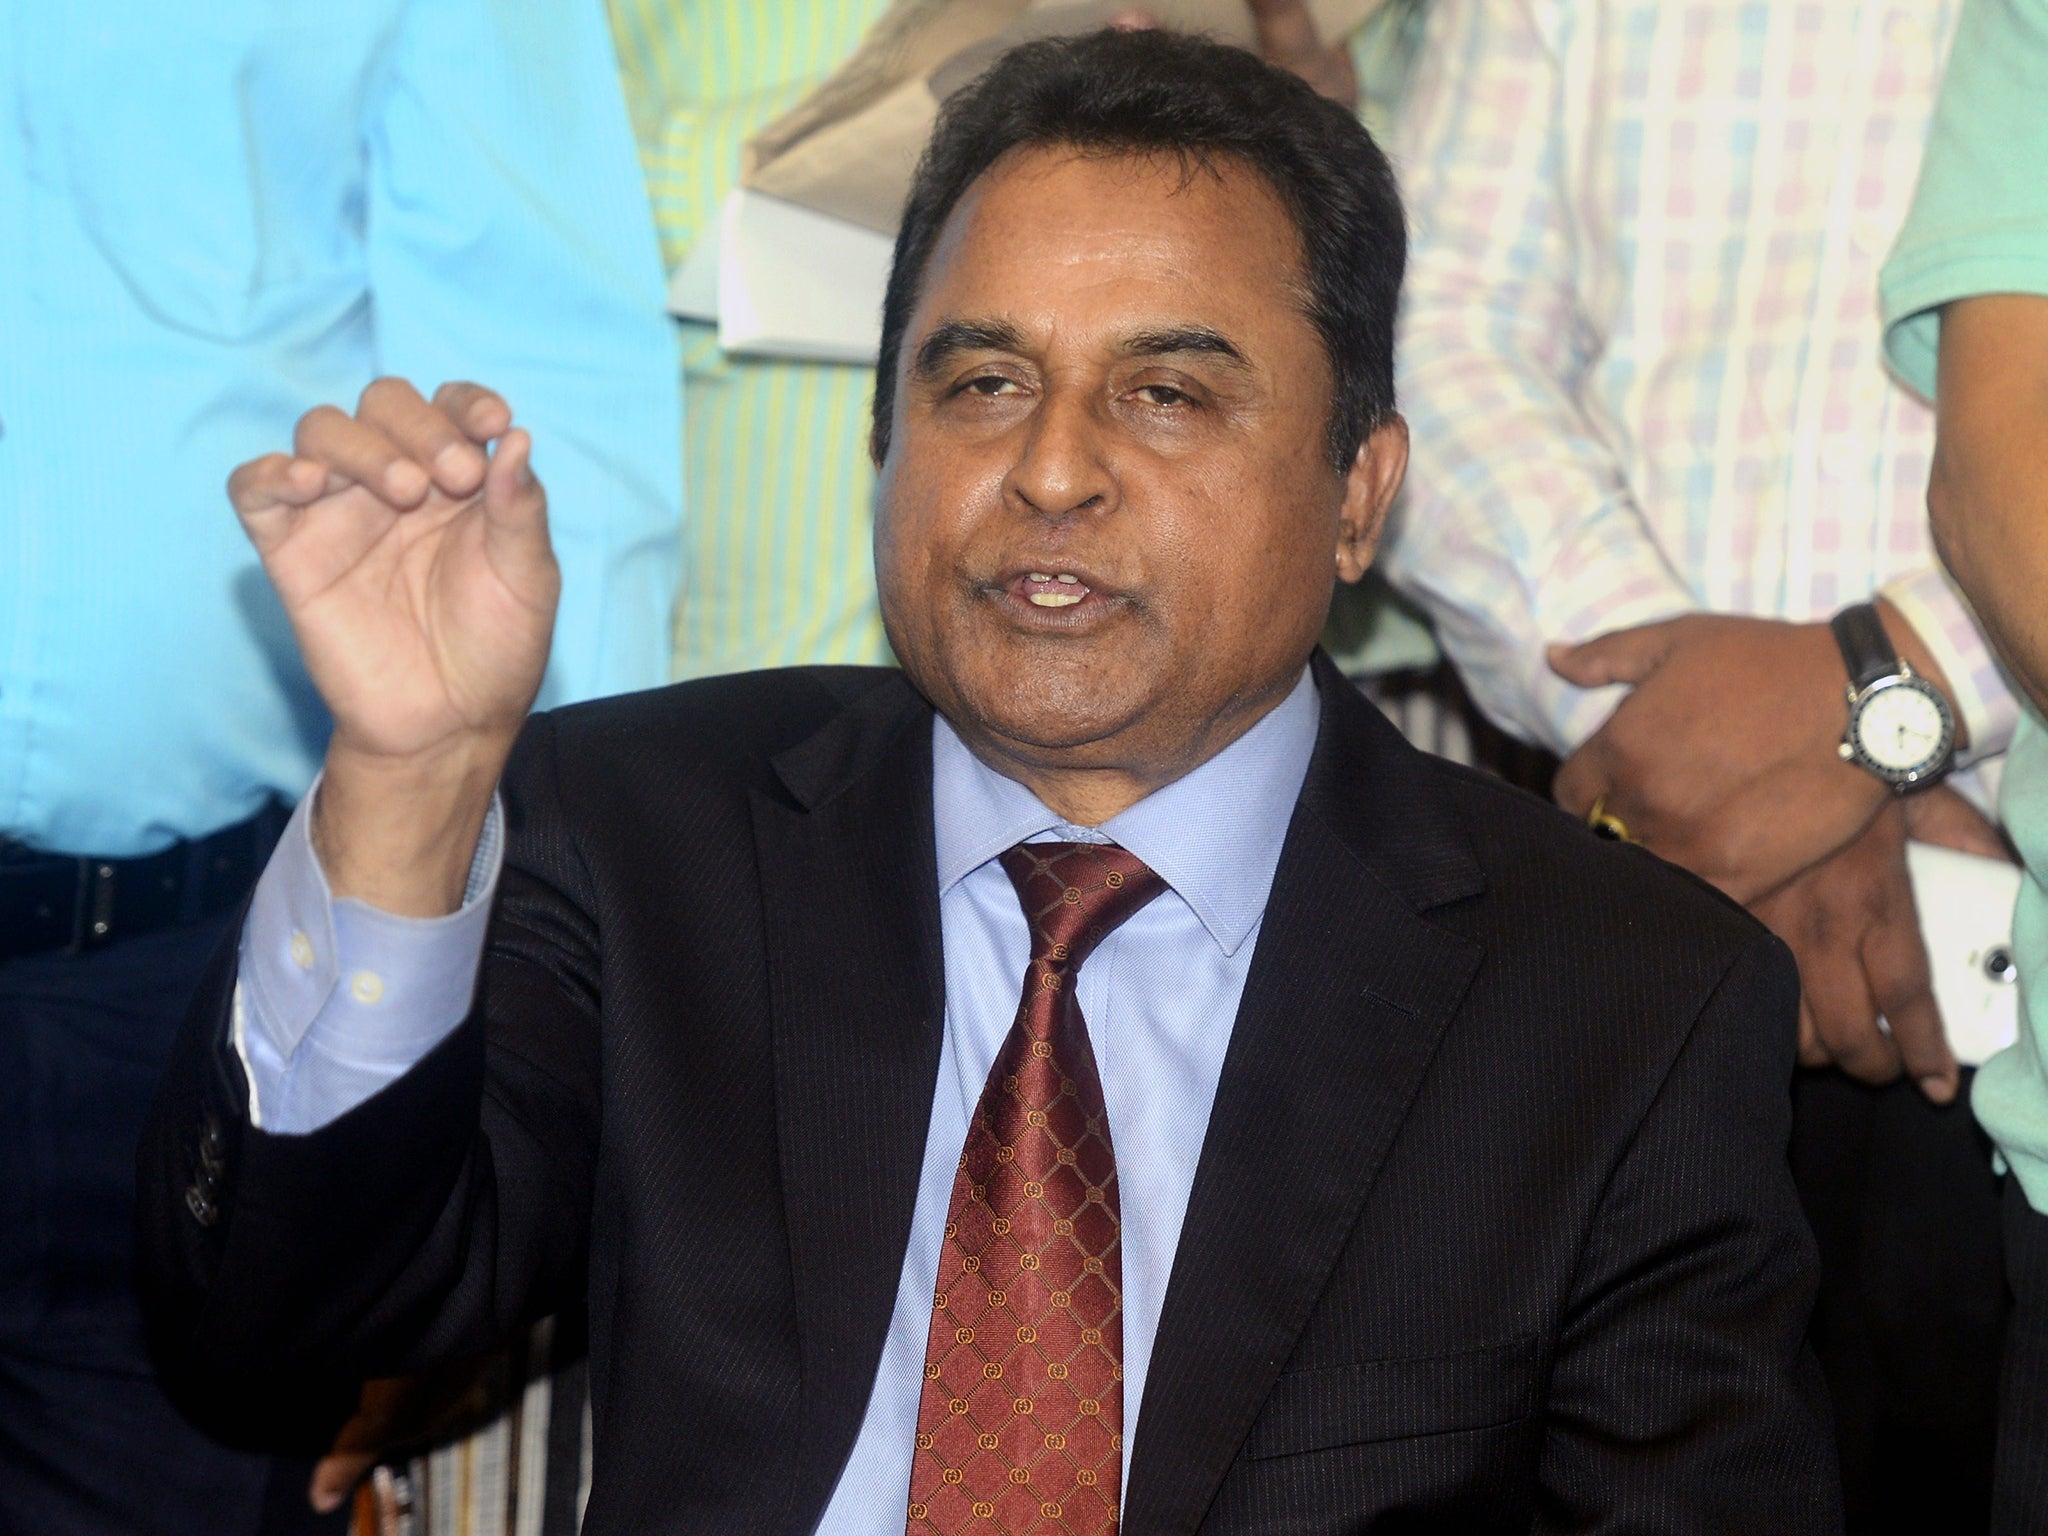 Mustafa Kamal was furious about the decision that went against Bangladesh in their quarter-final